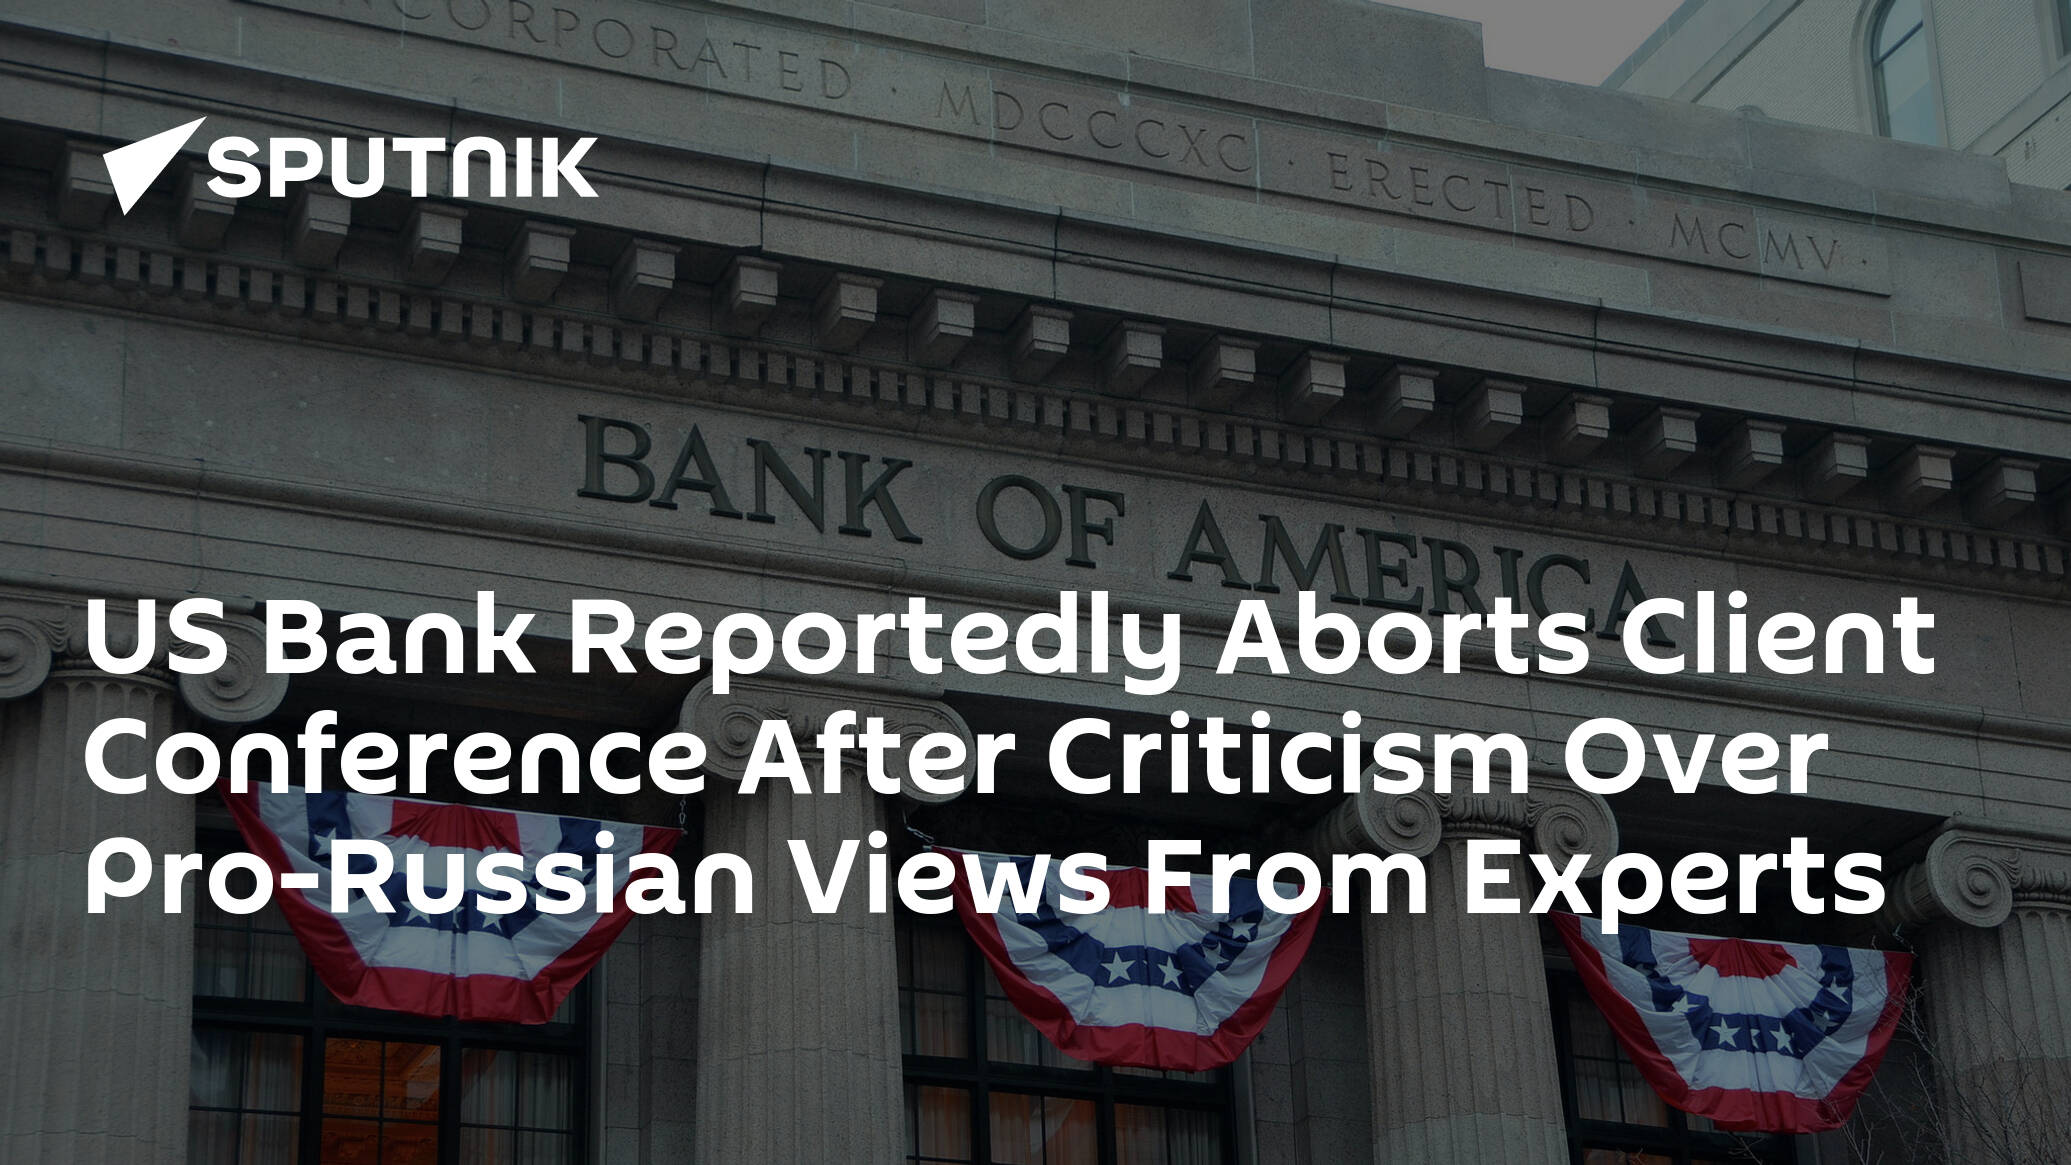 US Bank Reportedly Aborts Client Conference After Criticism Over Pro-Russian Views From Experts